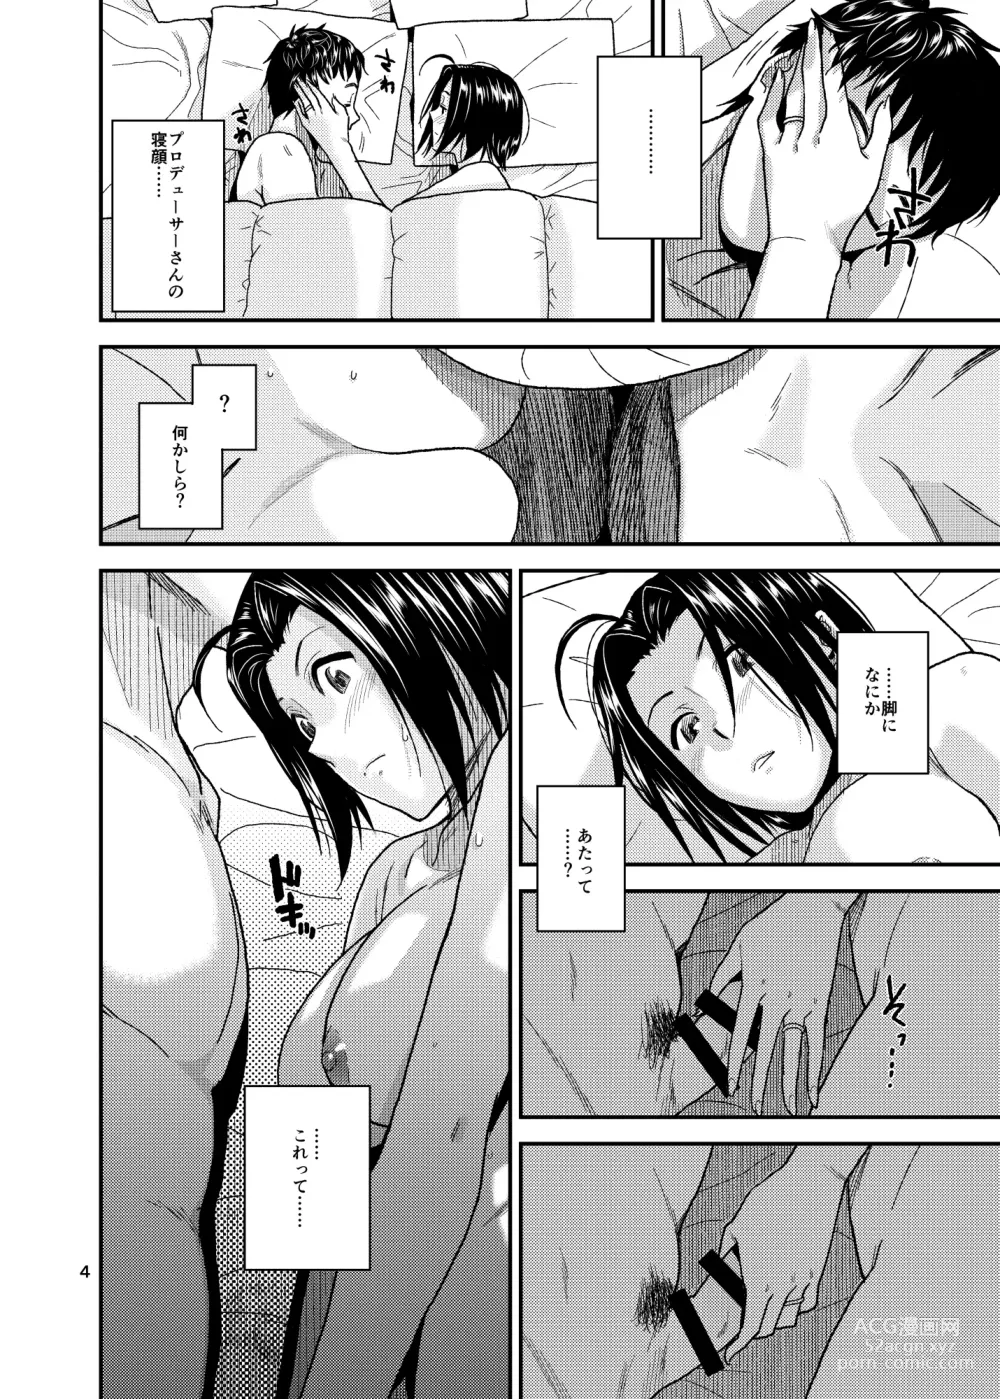 Page 5 of doujinshi Tender Time